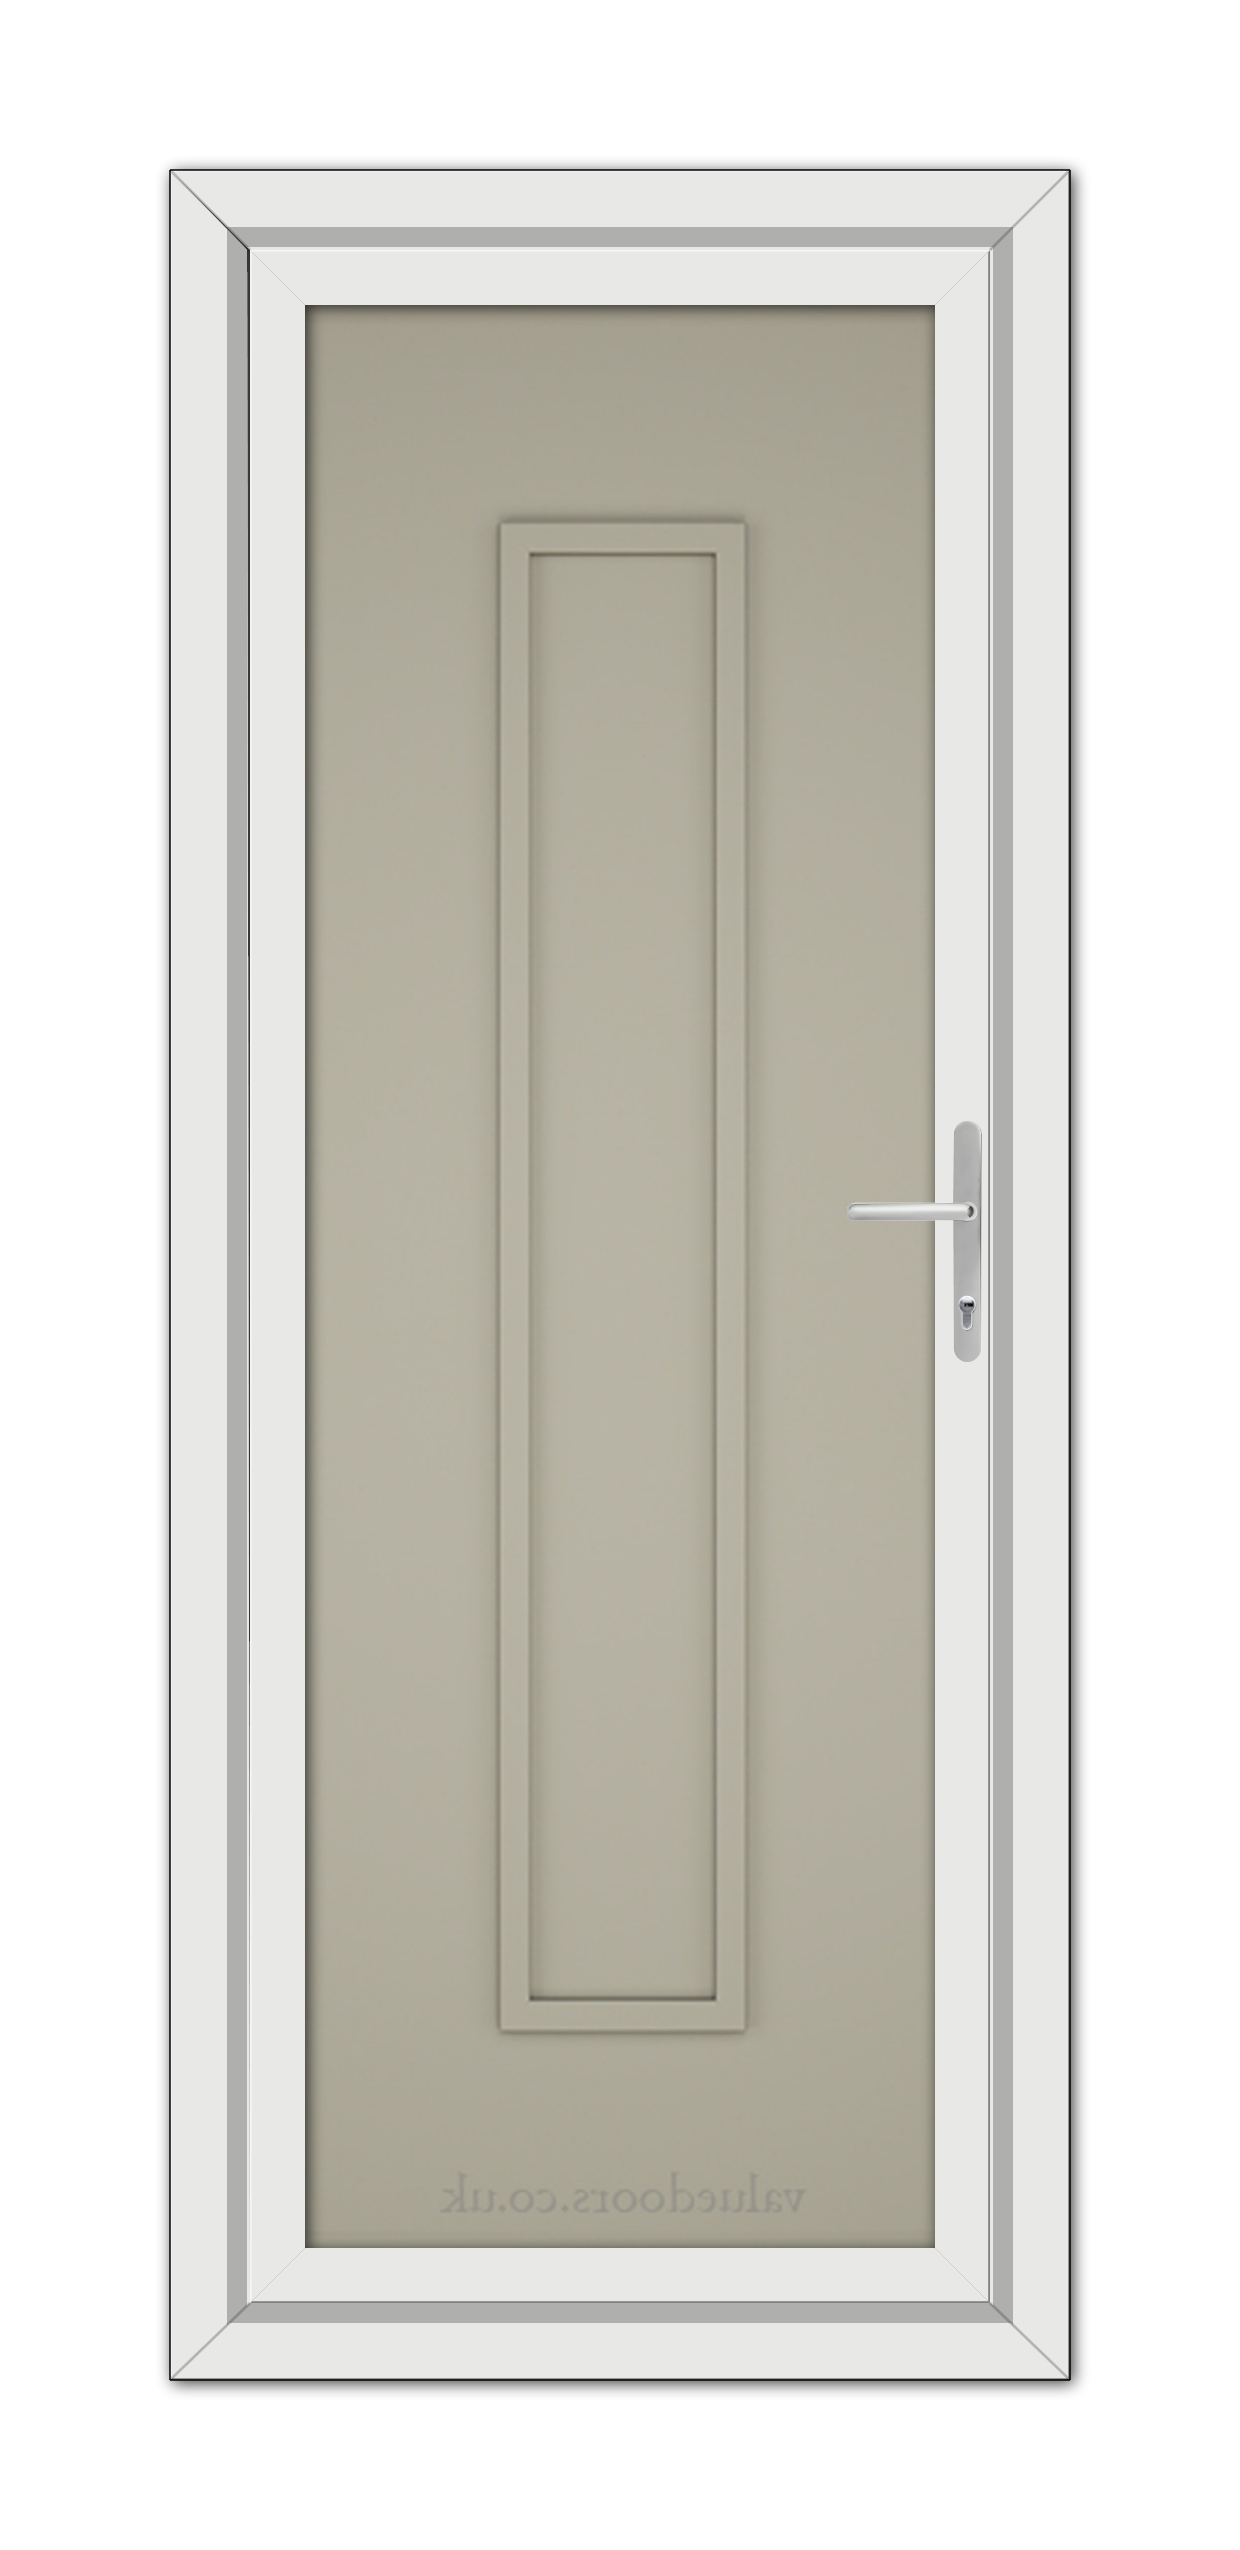 A modern, closed Pebble Grey Modern 5101 Solid uPVC Door with a simple handle, set in a white frame against a plain background.